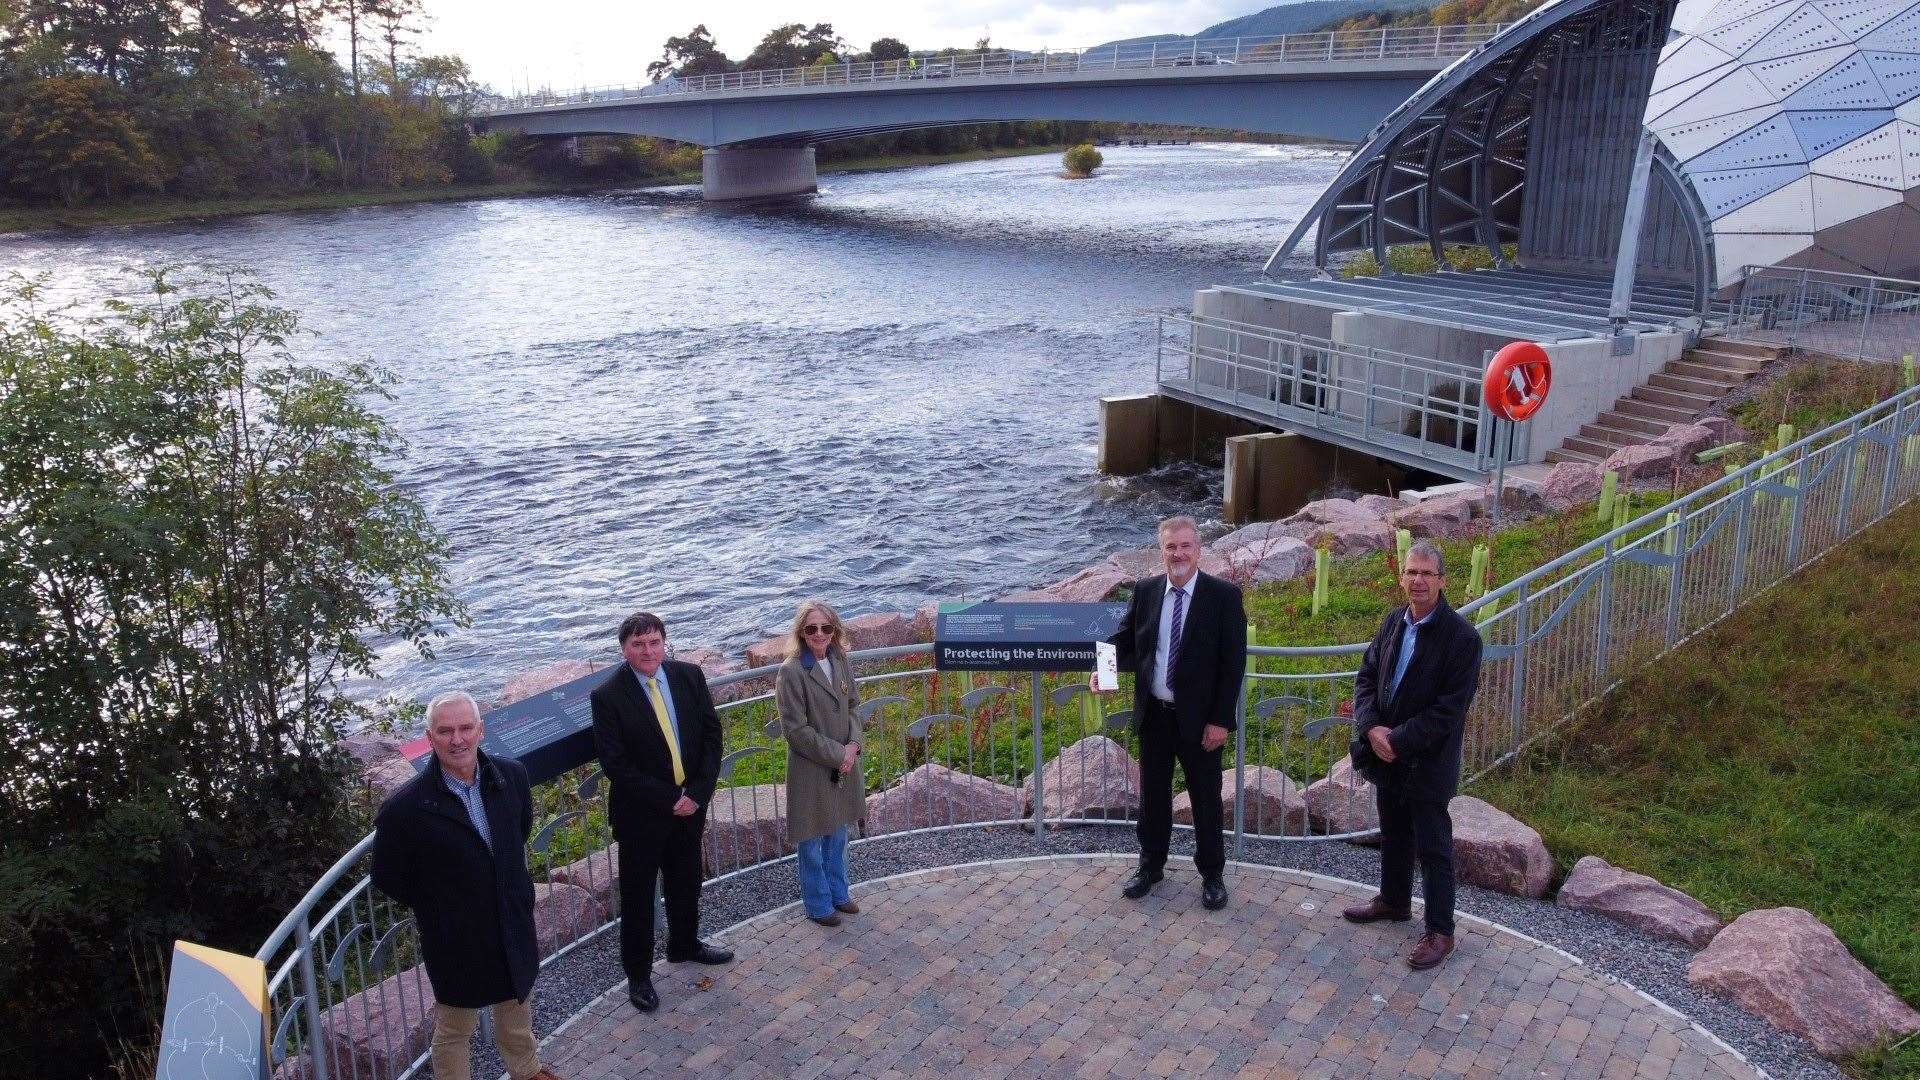 Caption: (Left to Right) Chair of Highland Council's Climate Change Committee, Cllr Karl Rosie, Chair of Highland Council's Economy & Infrastructure Committee, Cllr Ken Gowans, Provost of Inverness, Cllr Glynis Sinclair, Hydro Ness Project Manager Allan Henderson and Les Hutt of Leslie Hutt Architects.